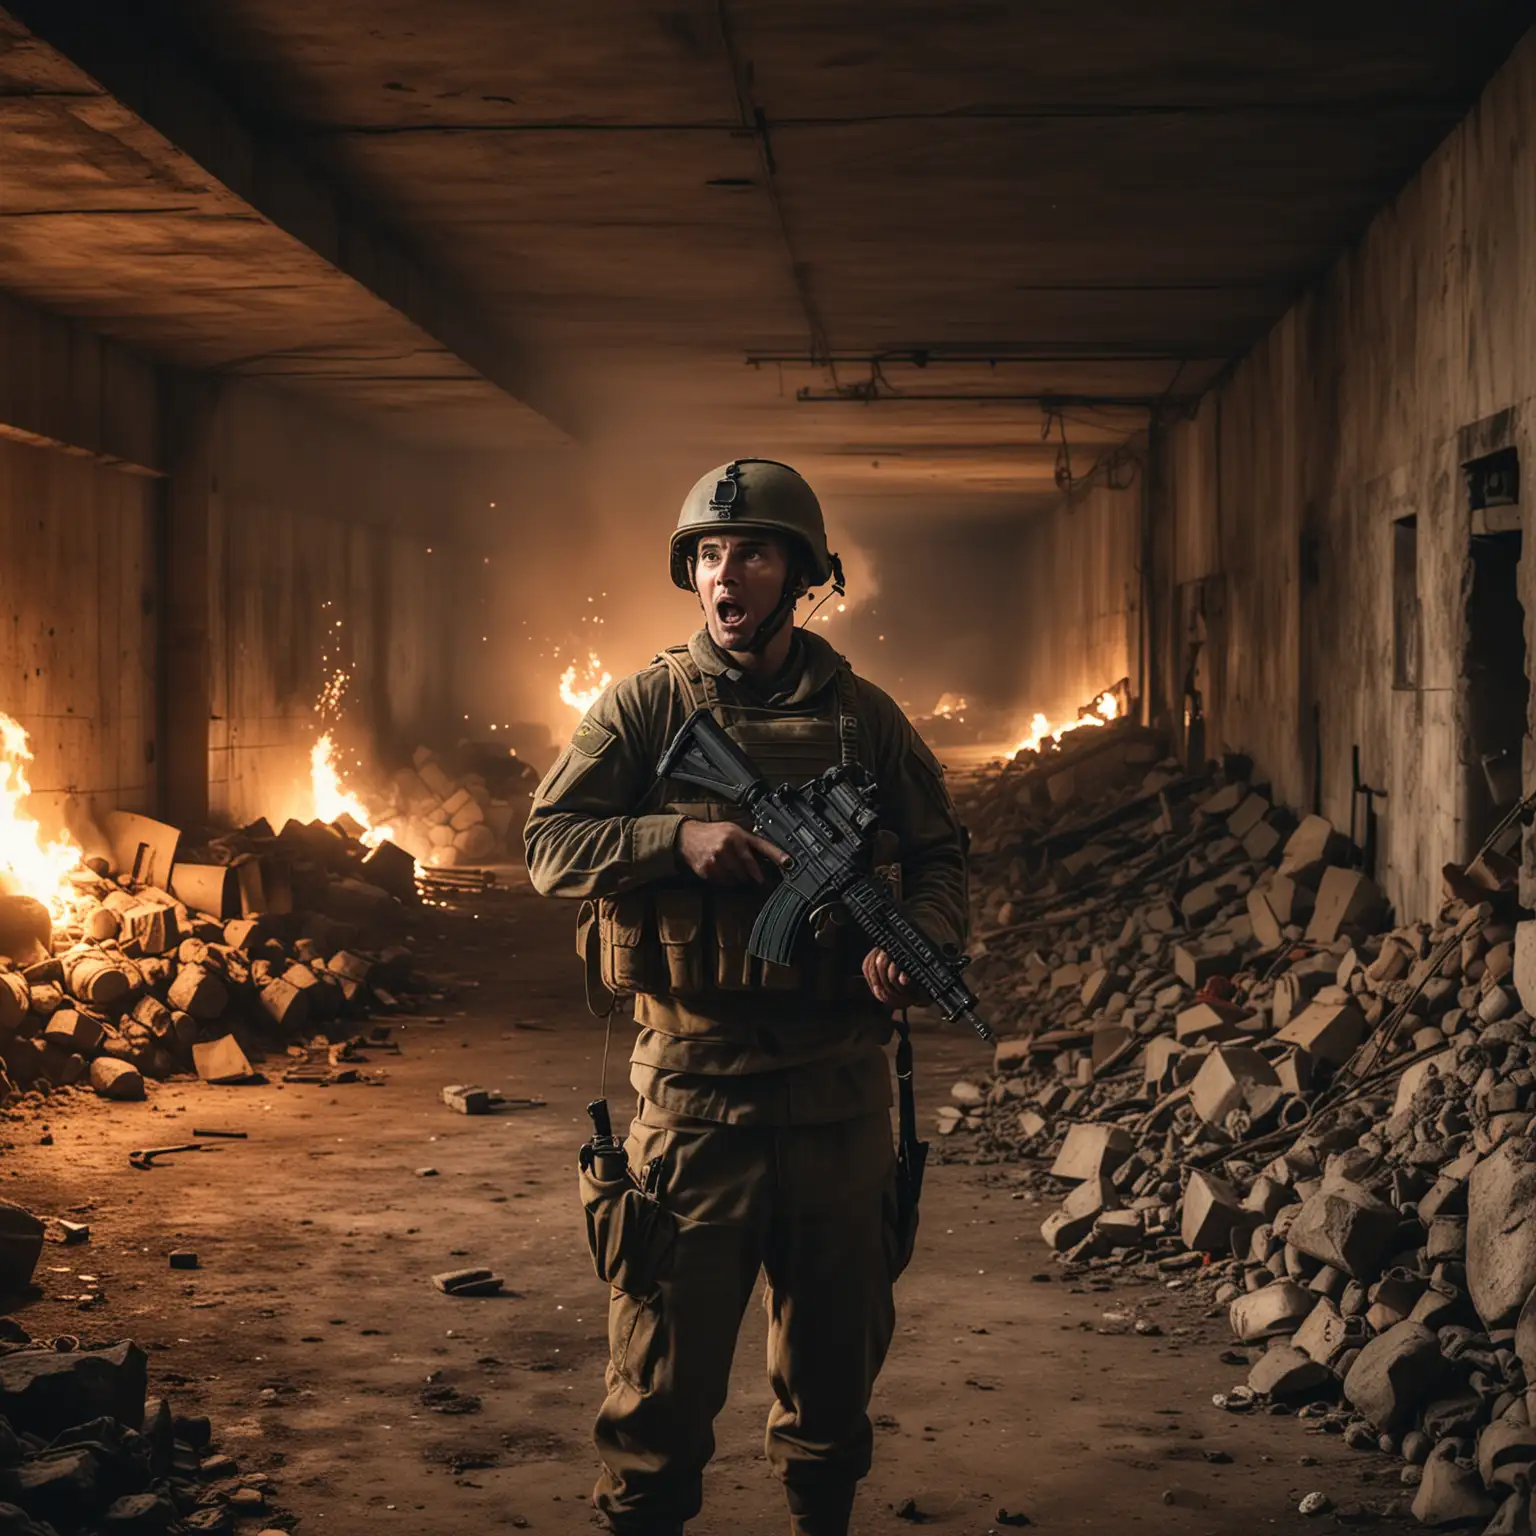 Shocked Military Soldier Surrounded by Fires in Underground Bunker